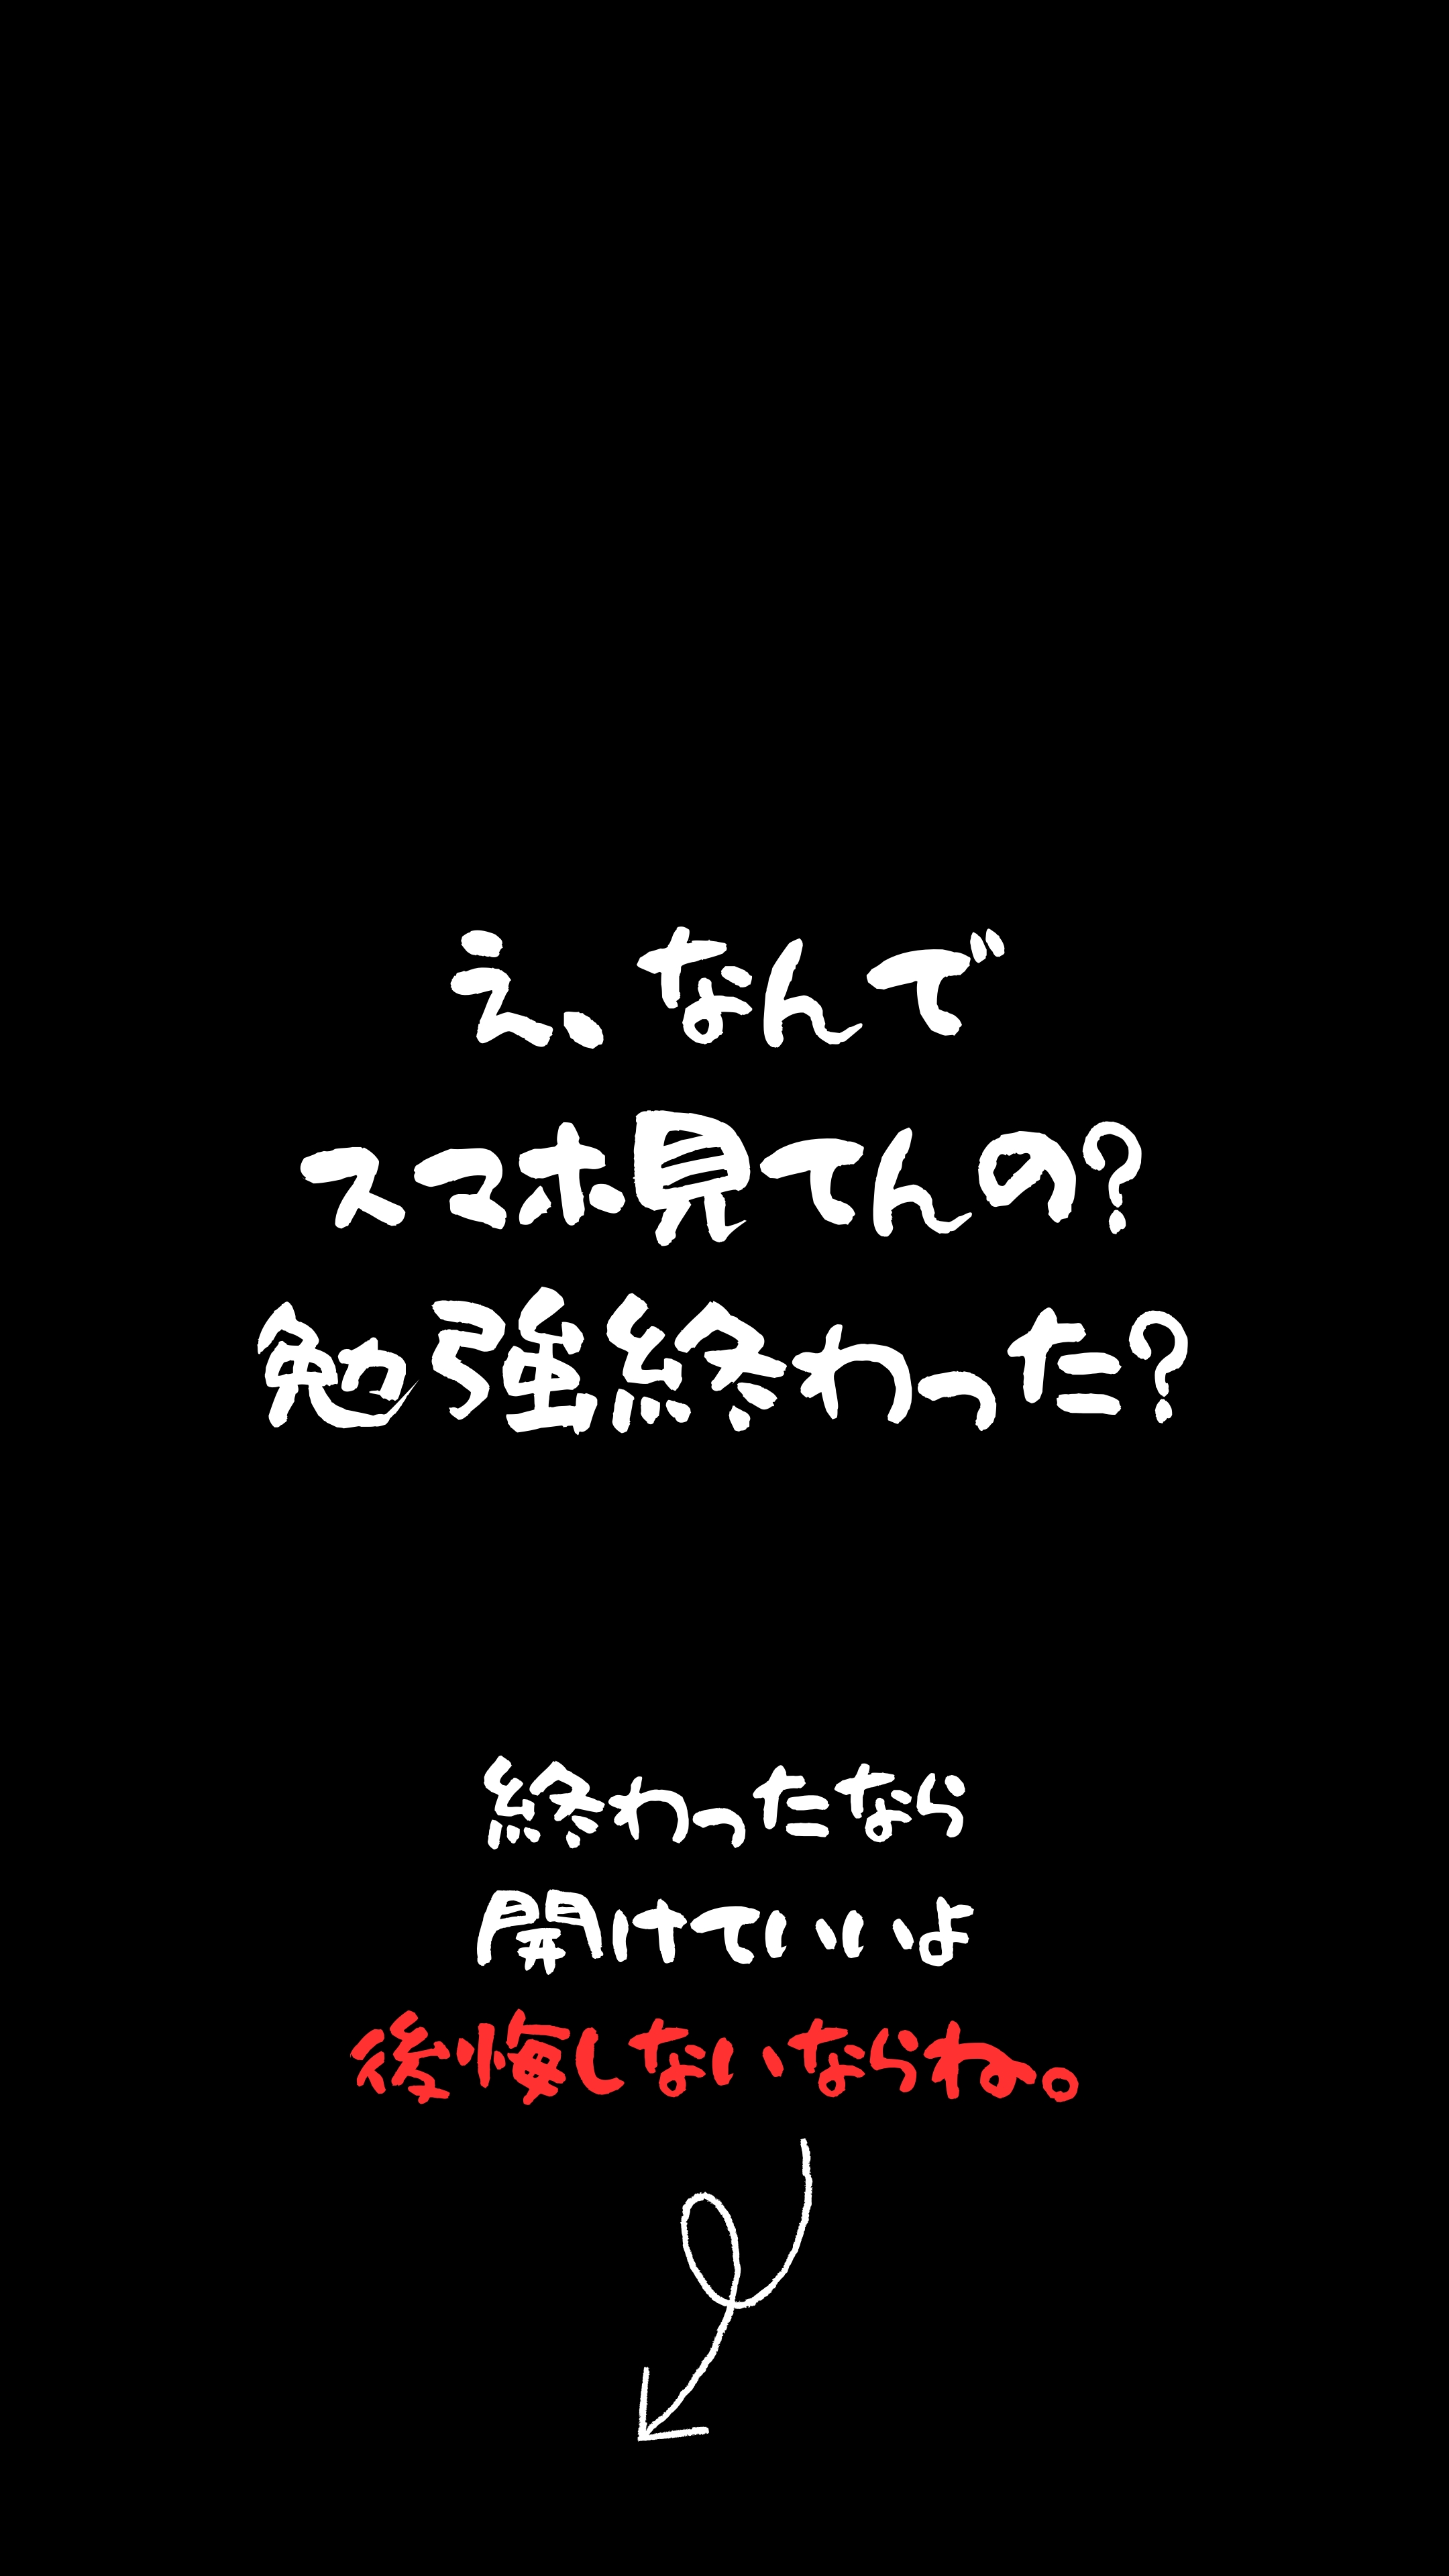 Mysterious Handwritten Japanese Question on Black Валлпапер[5ae7481a6d774cc0a166]